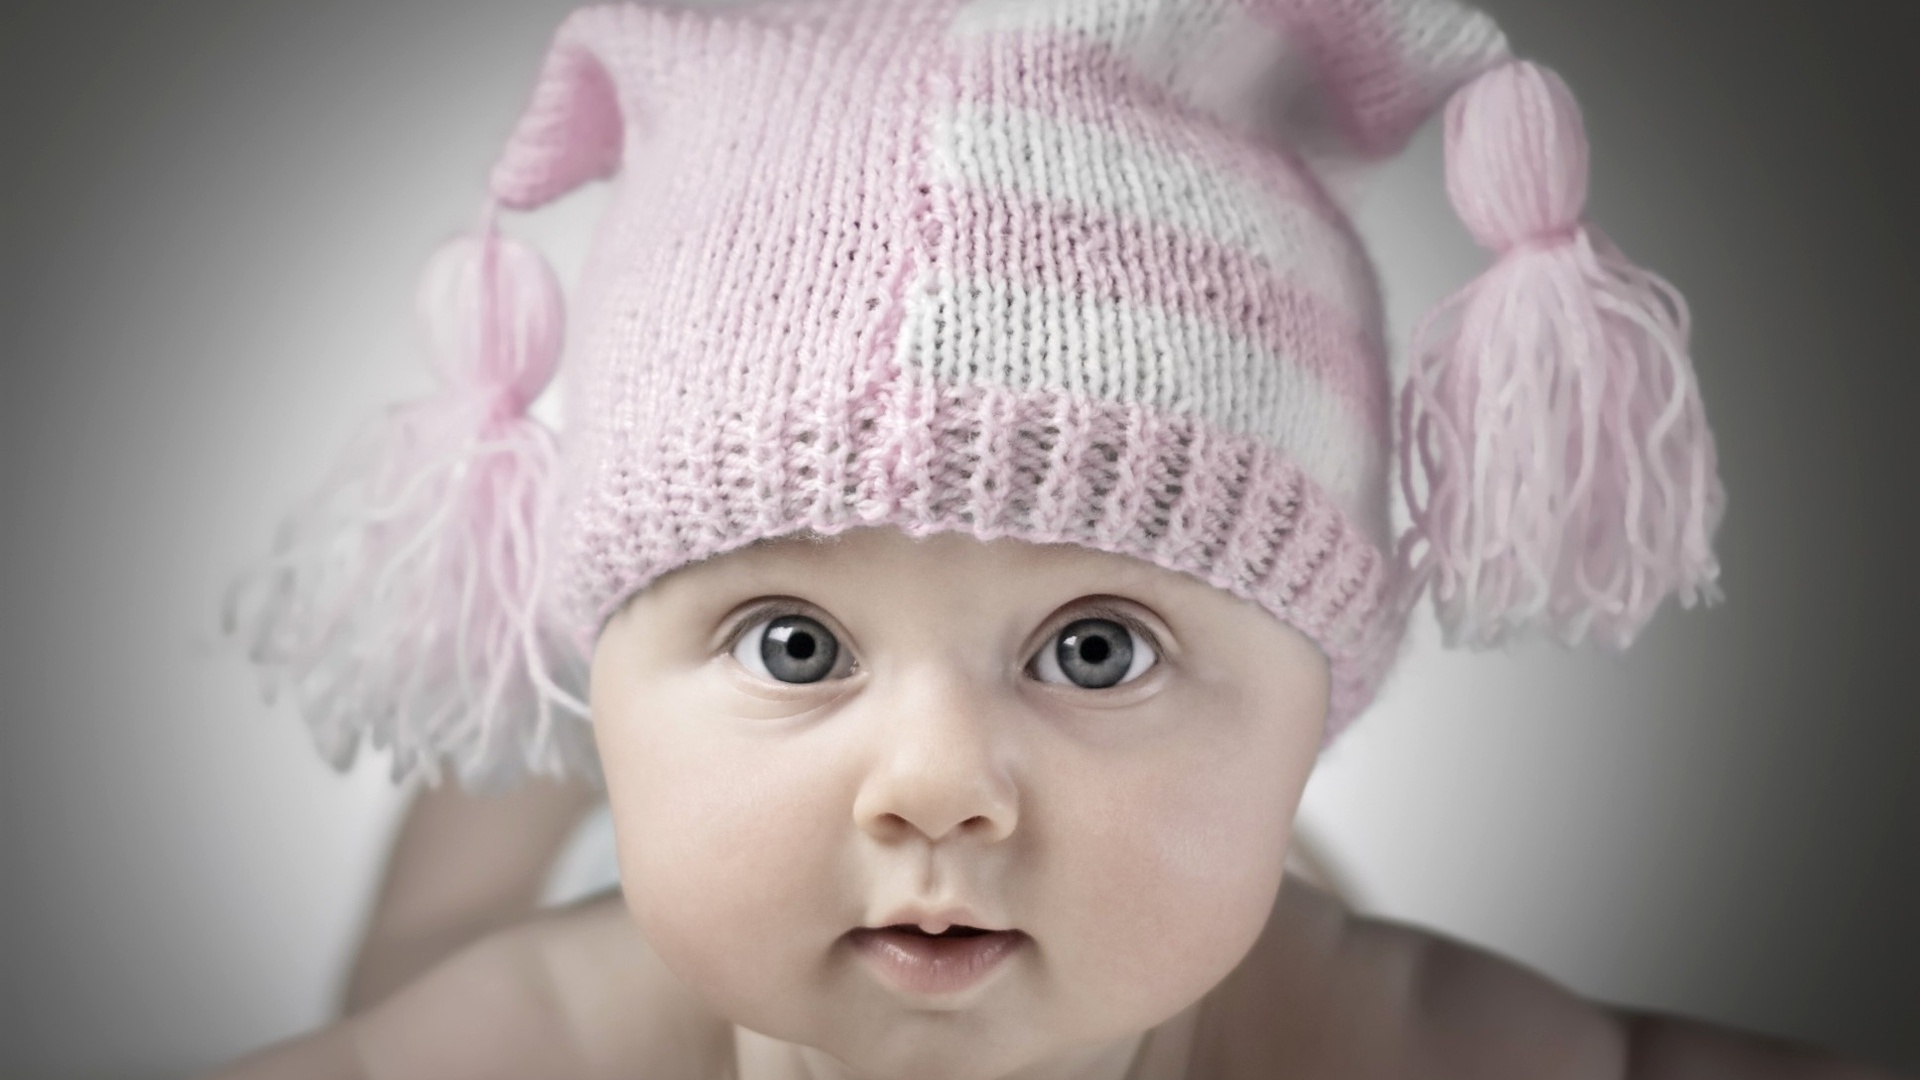 Cute Baby Wallpapers, Pictures, Images